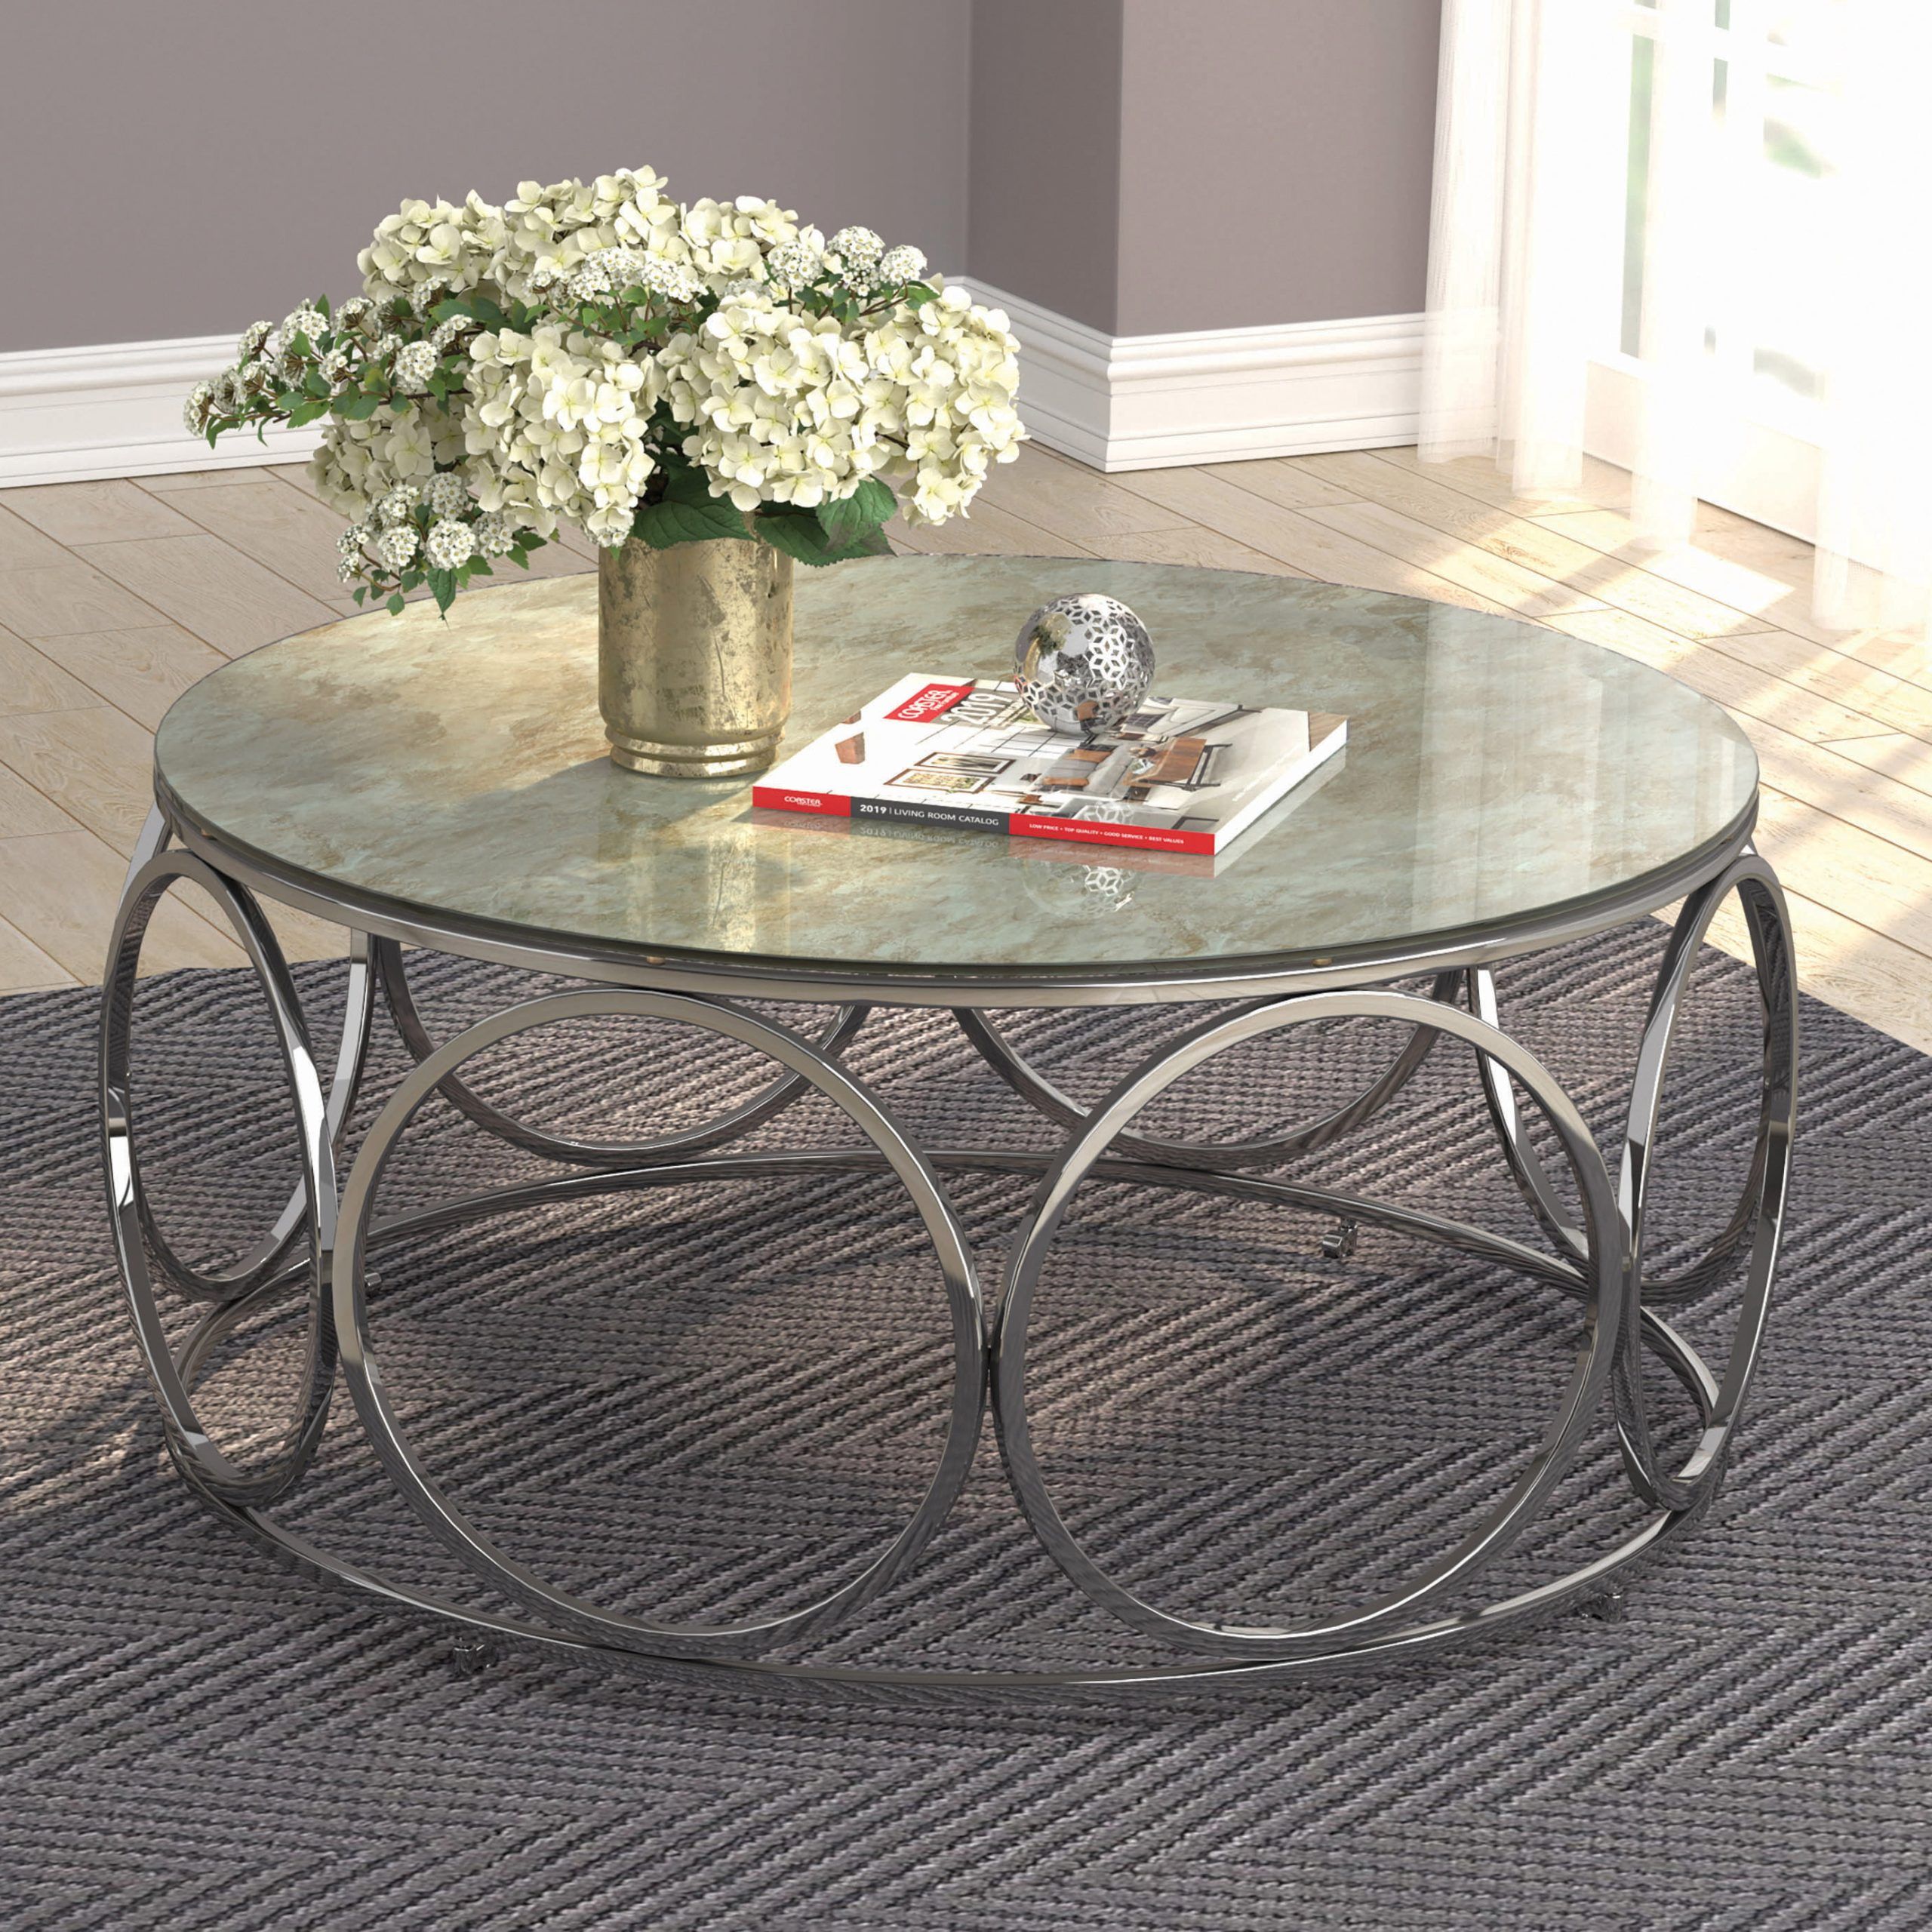 Round Coffee Table With Casters Beige Marble And Chrome – Walmart In Round Coffee Tables (View 8 of 15)